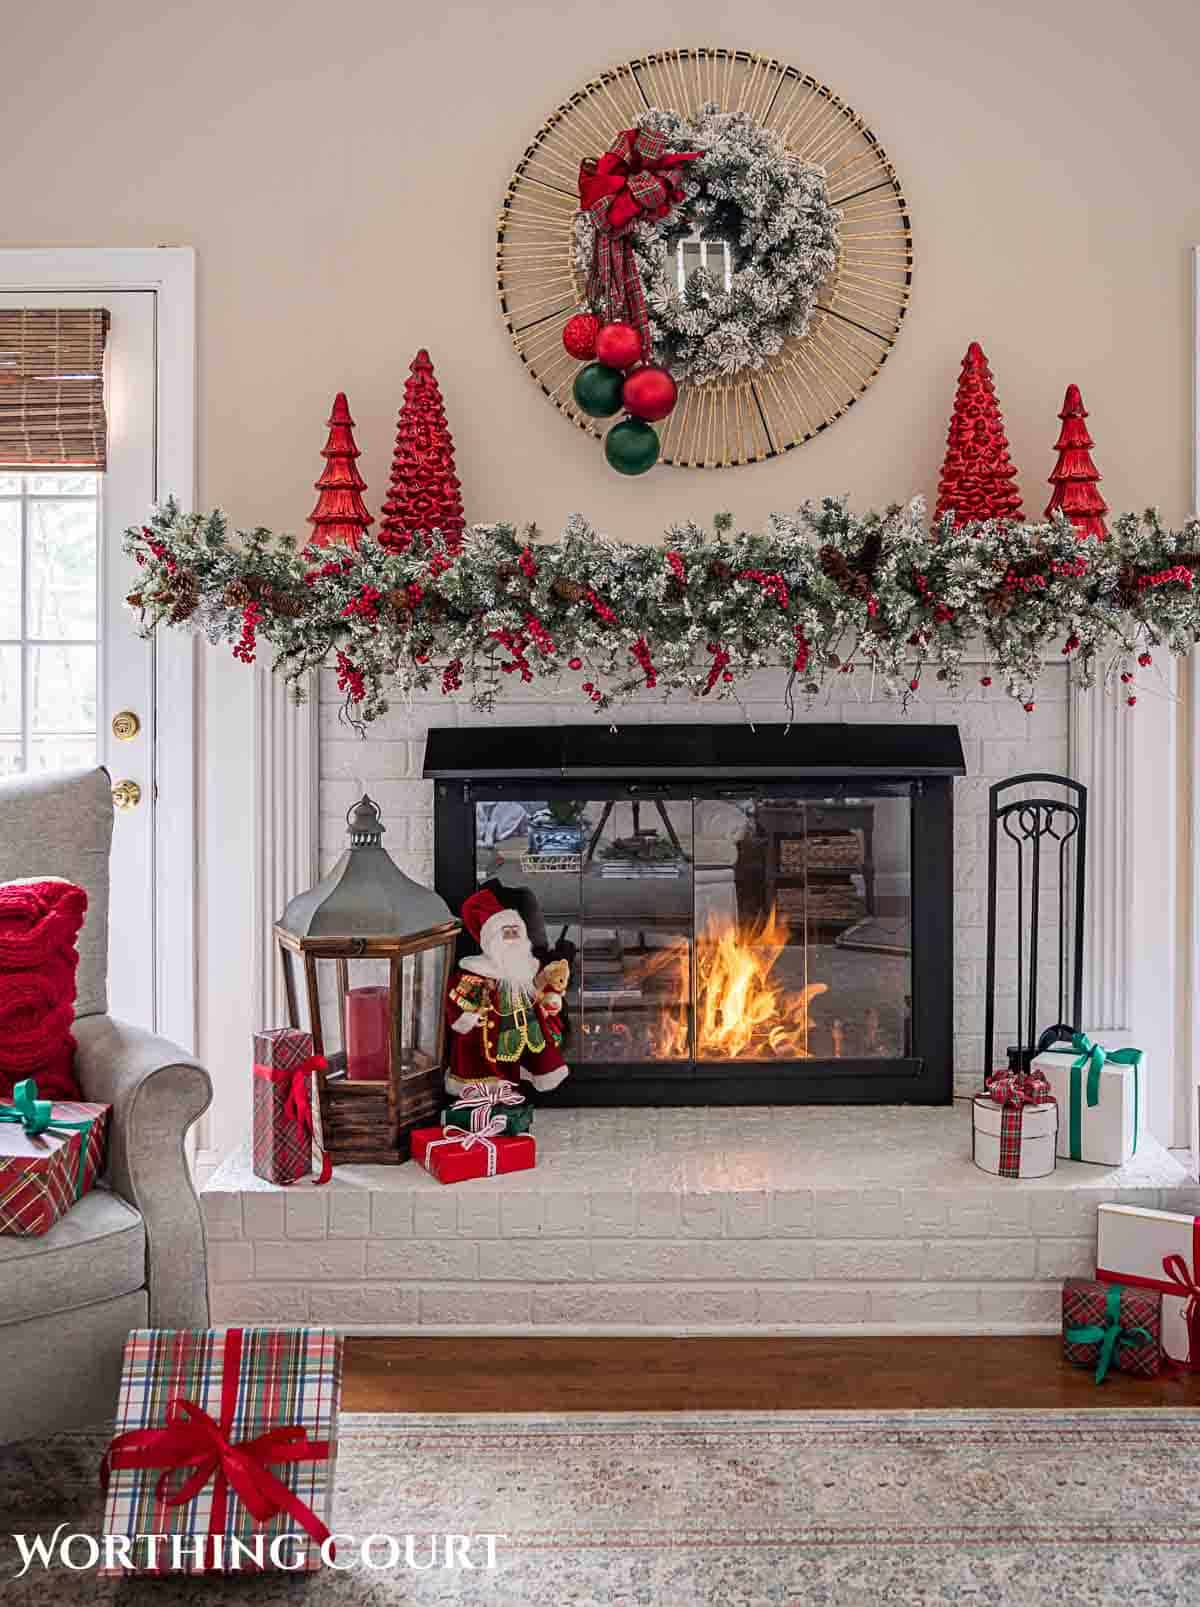 Christmas tree, fireplace and living room decorated for Christmas with red green and gold decorations